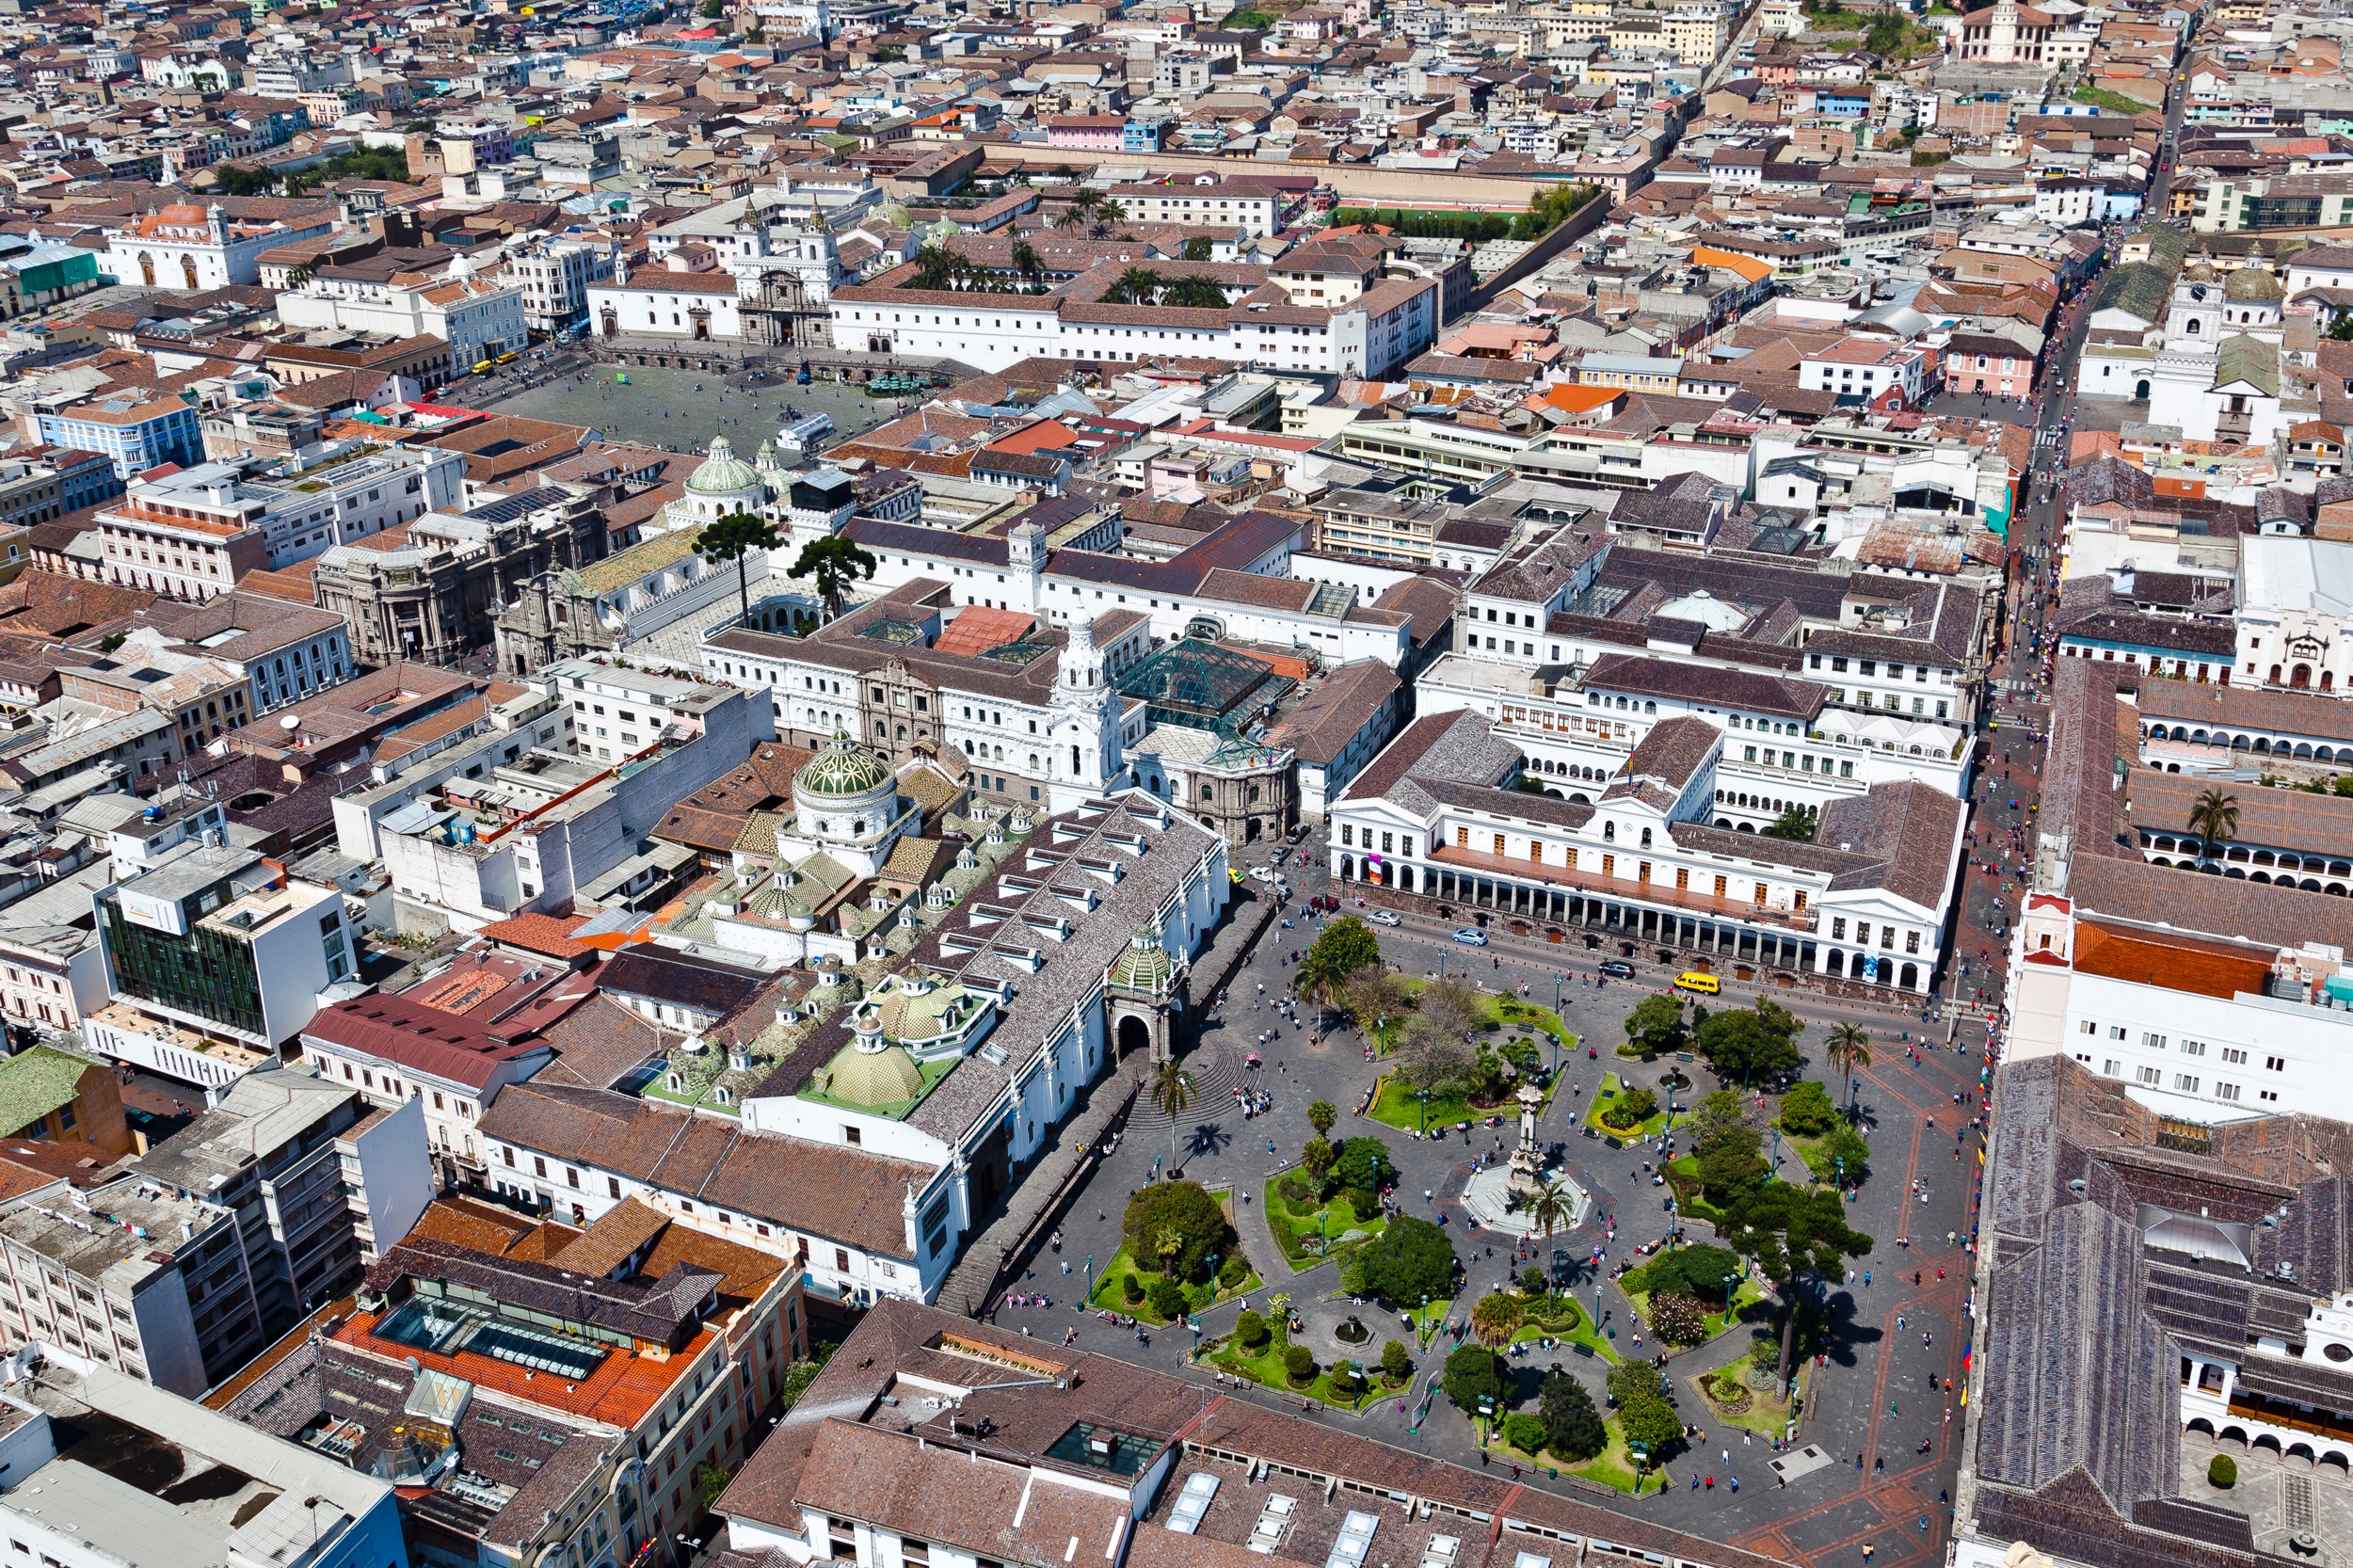 Quito’s Old Town: 